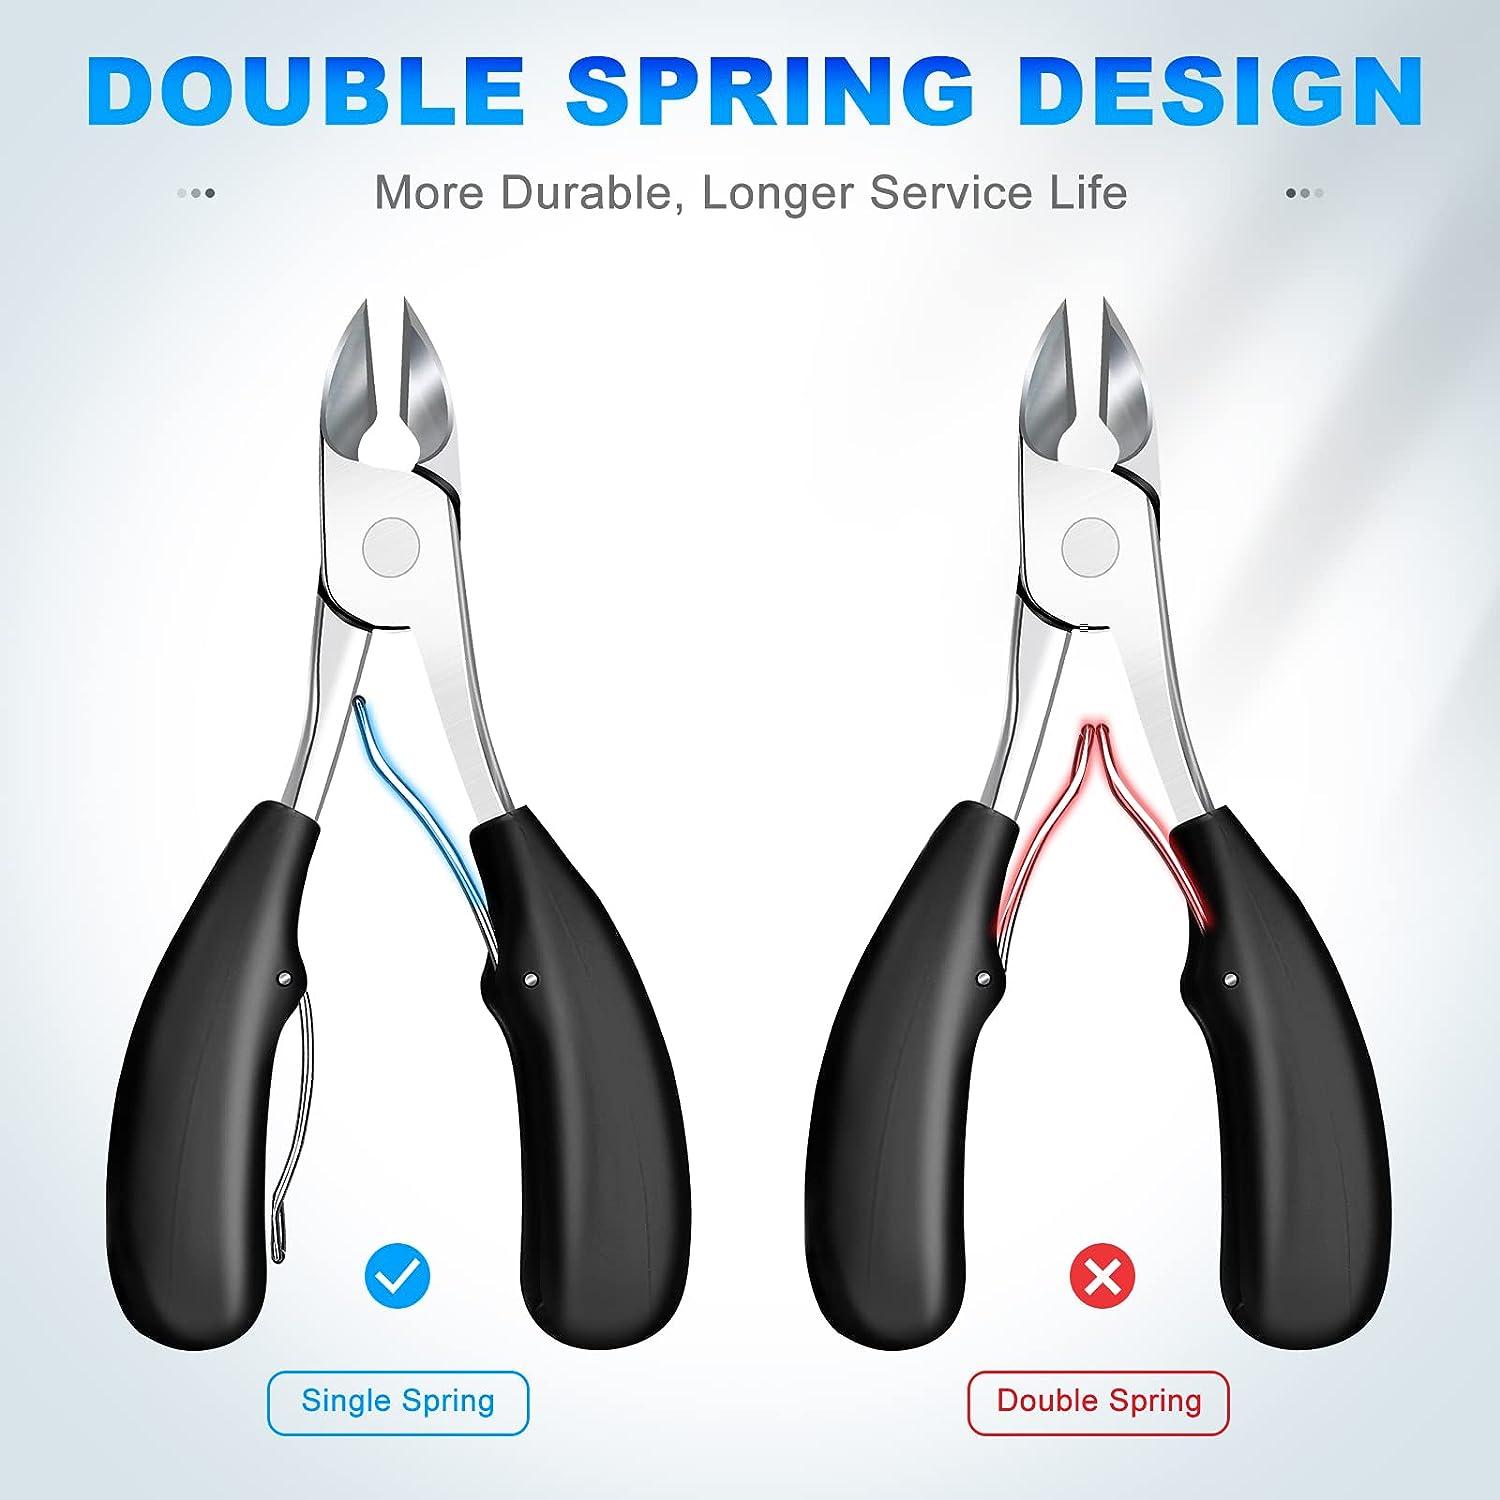 VANWIN Toenail Clippers for Seniors Thick Toenails, Wide Jaw Opening Large  Toe Nail Clippers with Catcher, Professional Sharp Curved Blade Heavy Duty